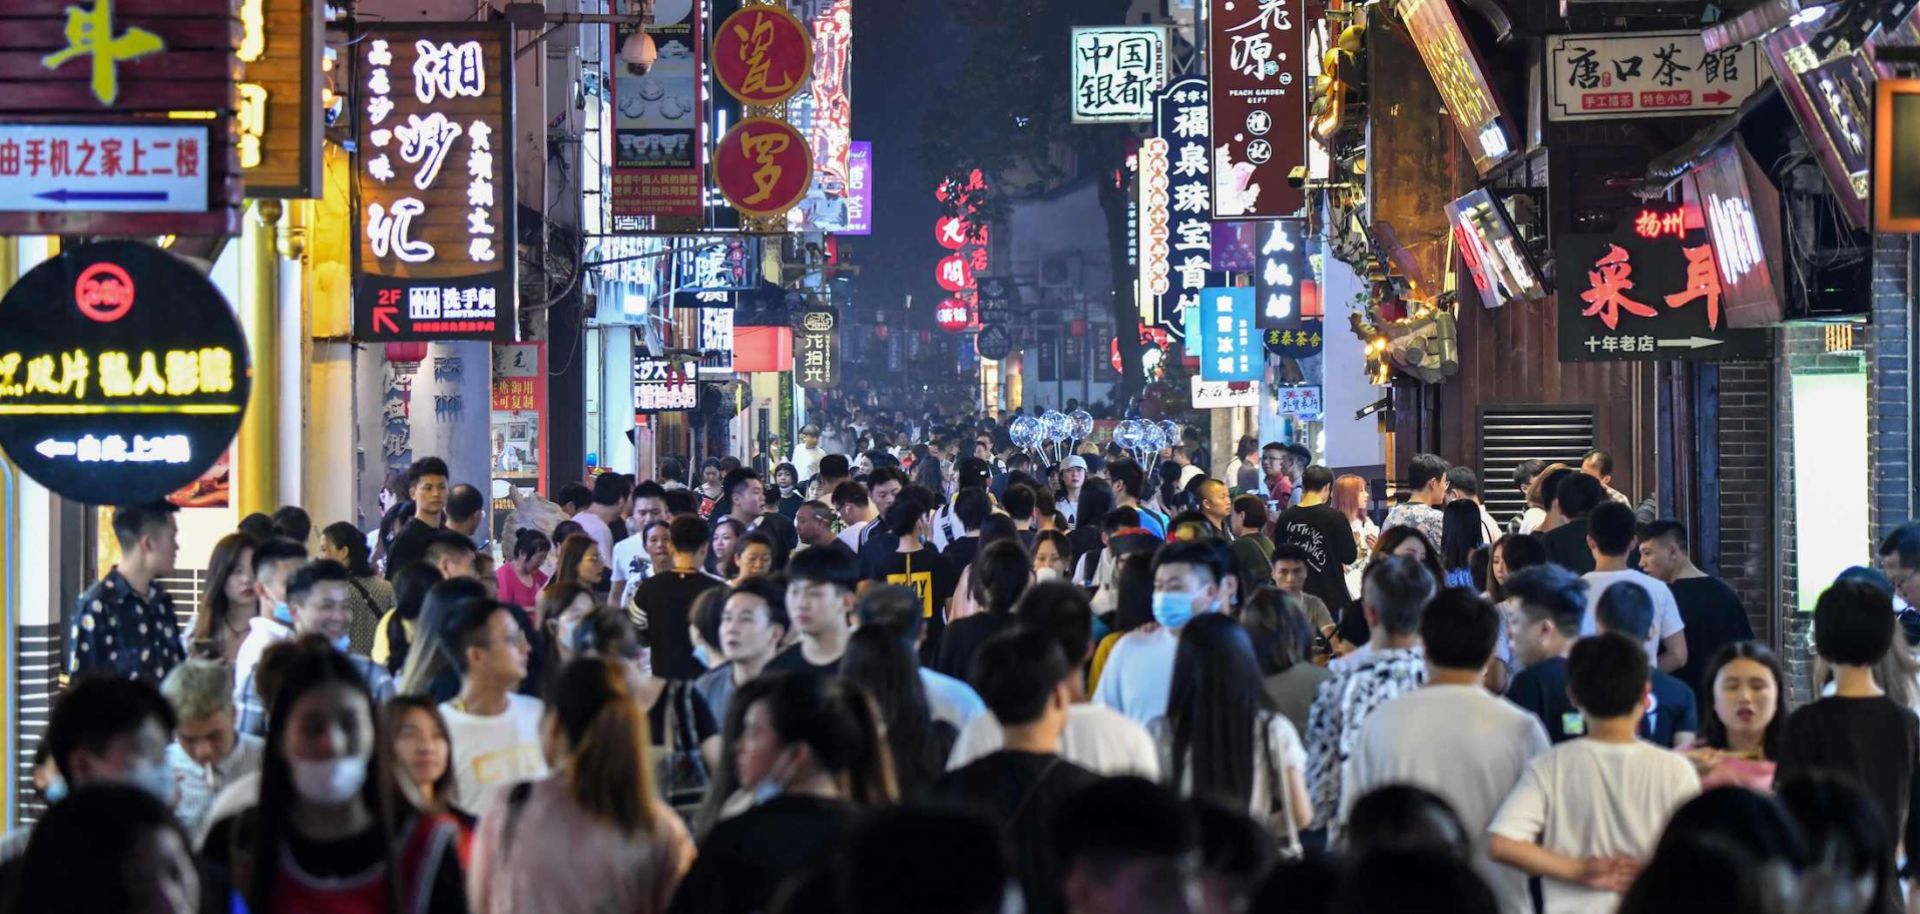 People walk along a pedestrian street surrounded by small shops in Changsha, China, on Sept. 7, 2020.